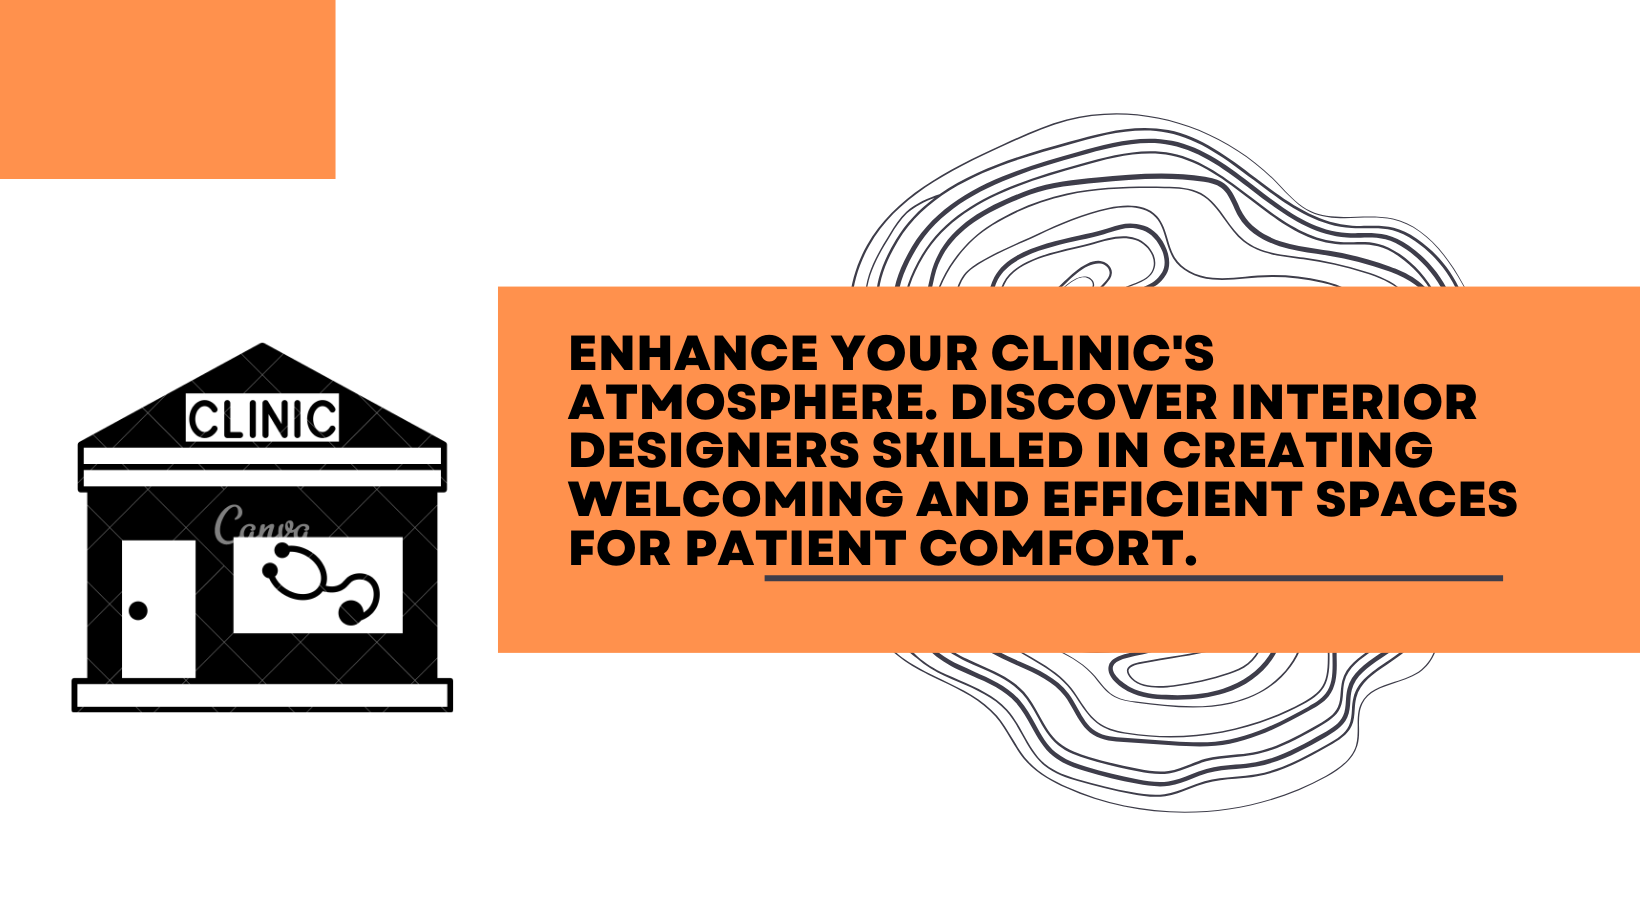 Enhance Your Clinic’s Atmosphere. Discover Interior Designers Skilled in Creating Welcoming and Efficient Spaces for Patient Comfort.